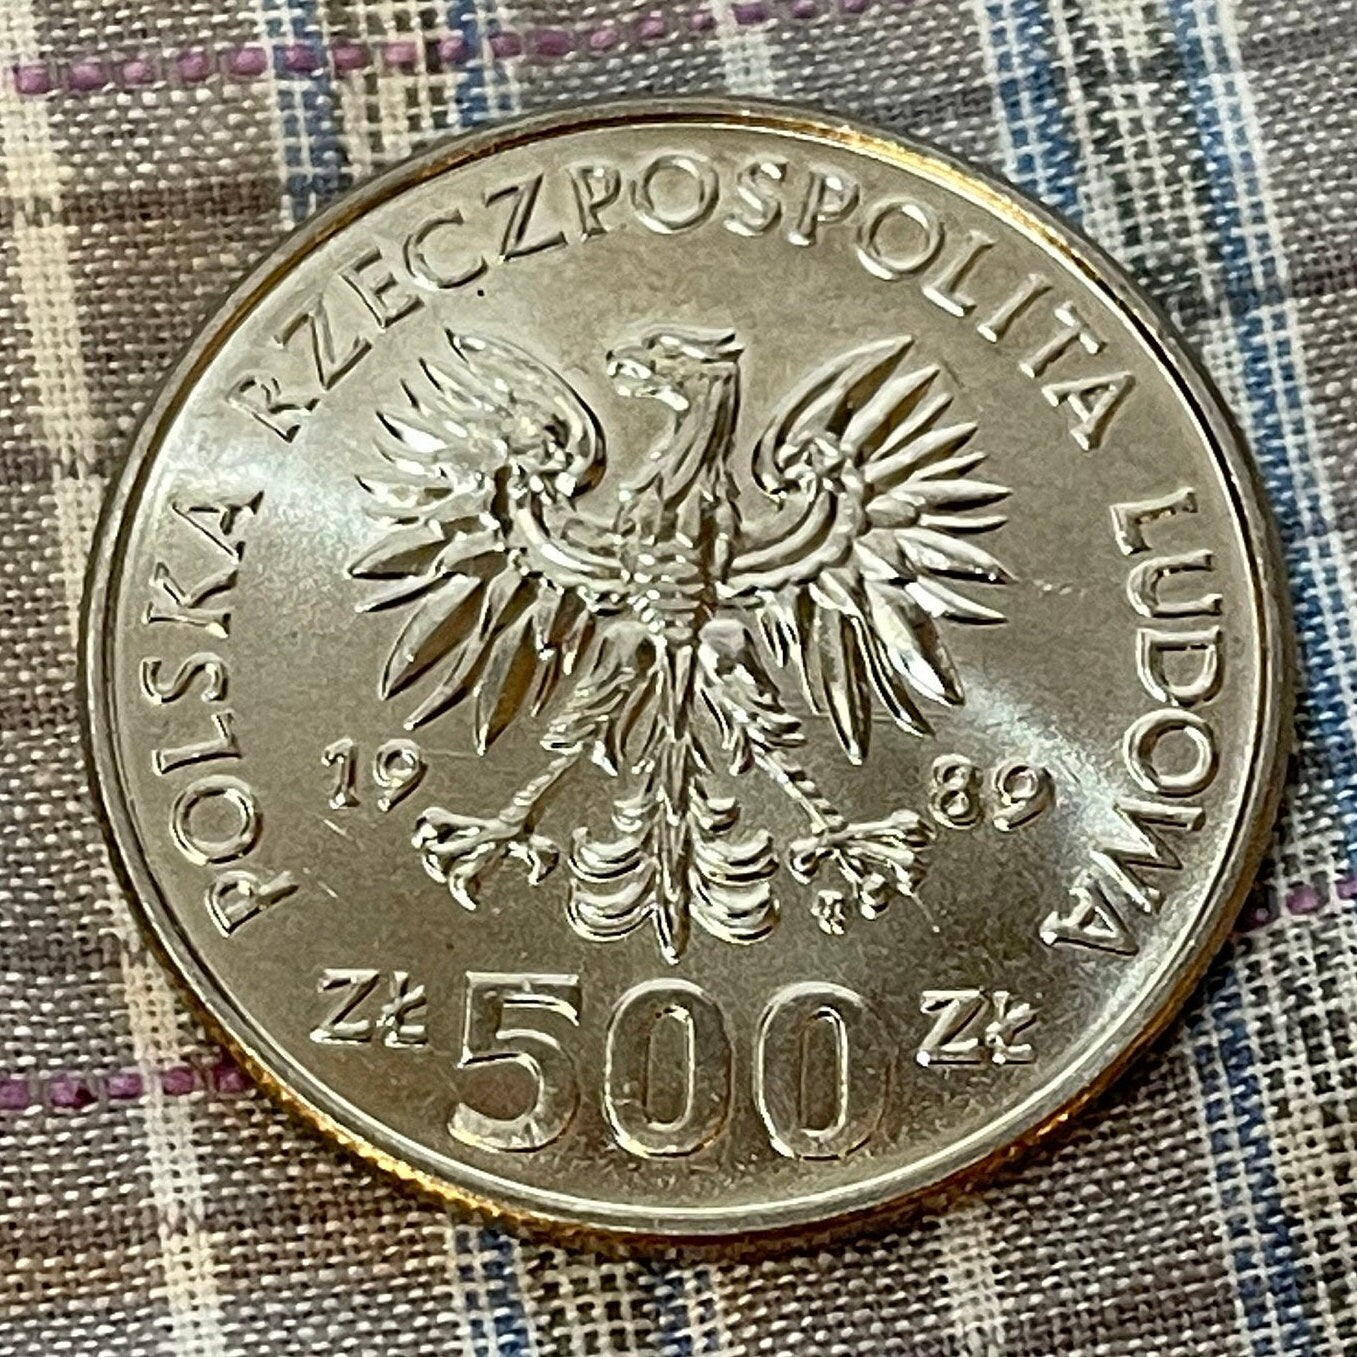 Polish Resistance World War II Invasion 500 Zlotych Poland Authentic Coin Money for Jewelry and Craft Making (Soldiers) (Allies) (1989)